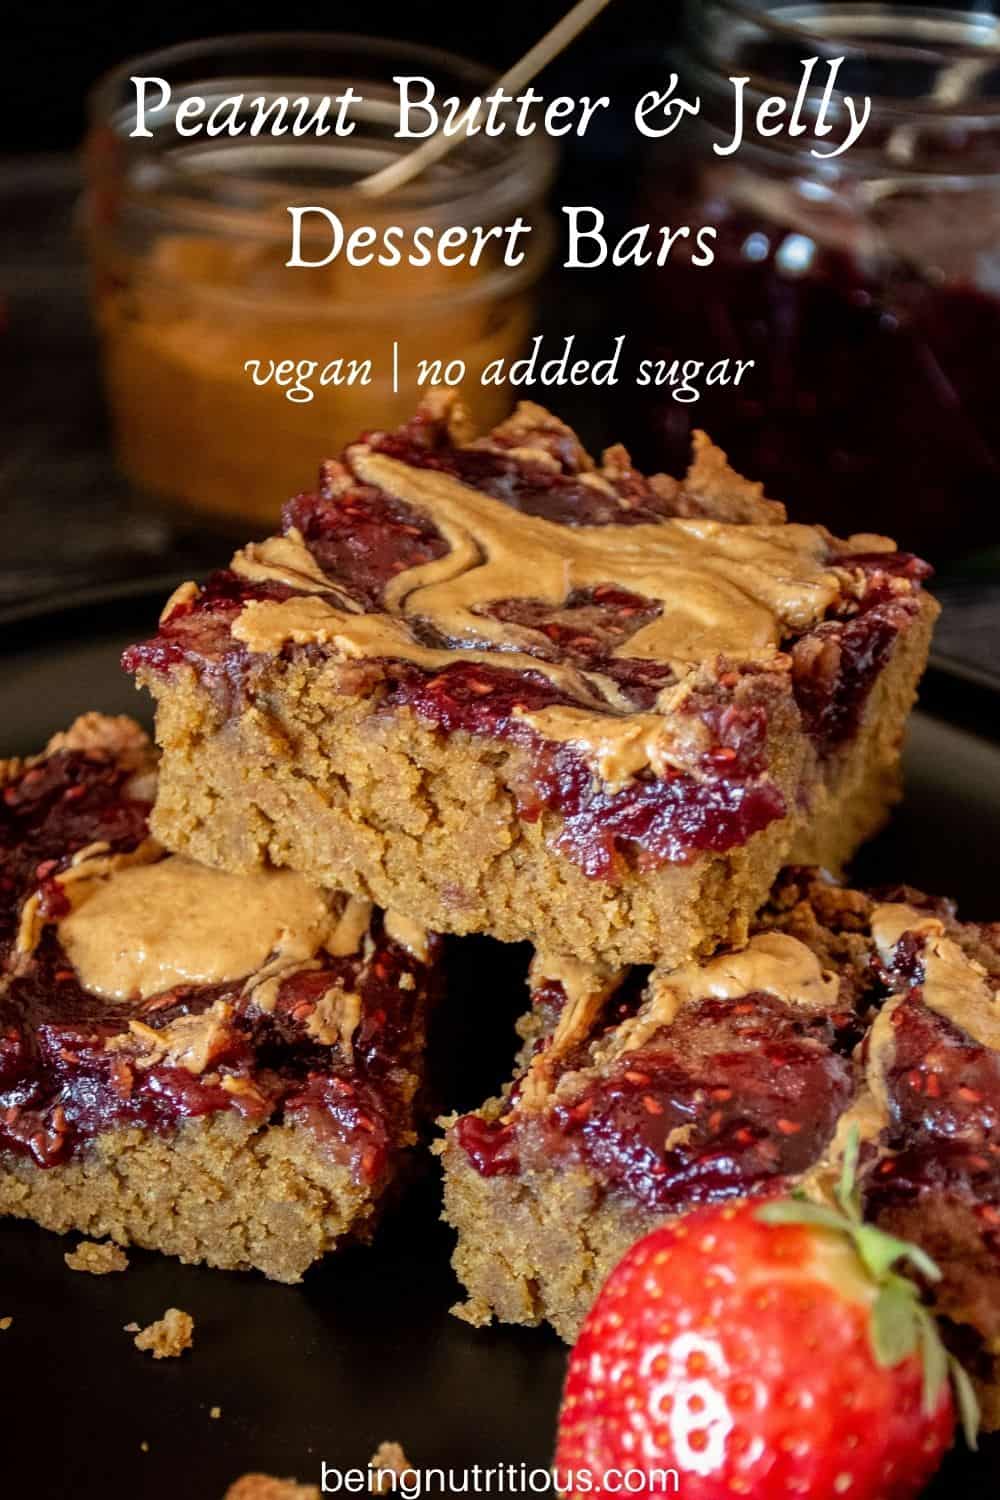 Close up of dessert bars stacked on a plate. Text overlay: Peanut Butter & Jelly Dessert Bars; vegan, no added sugar.